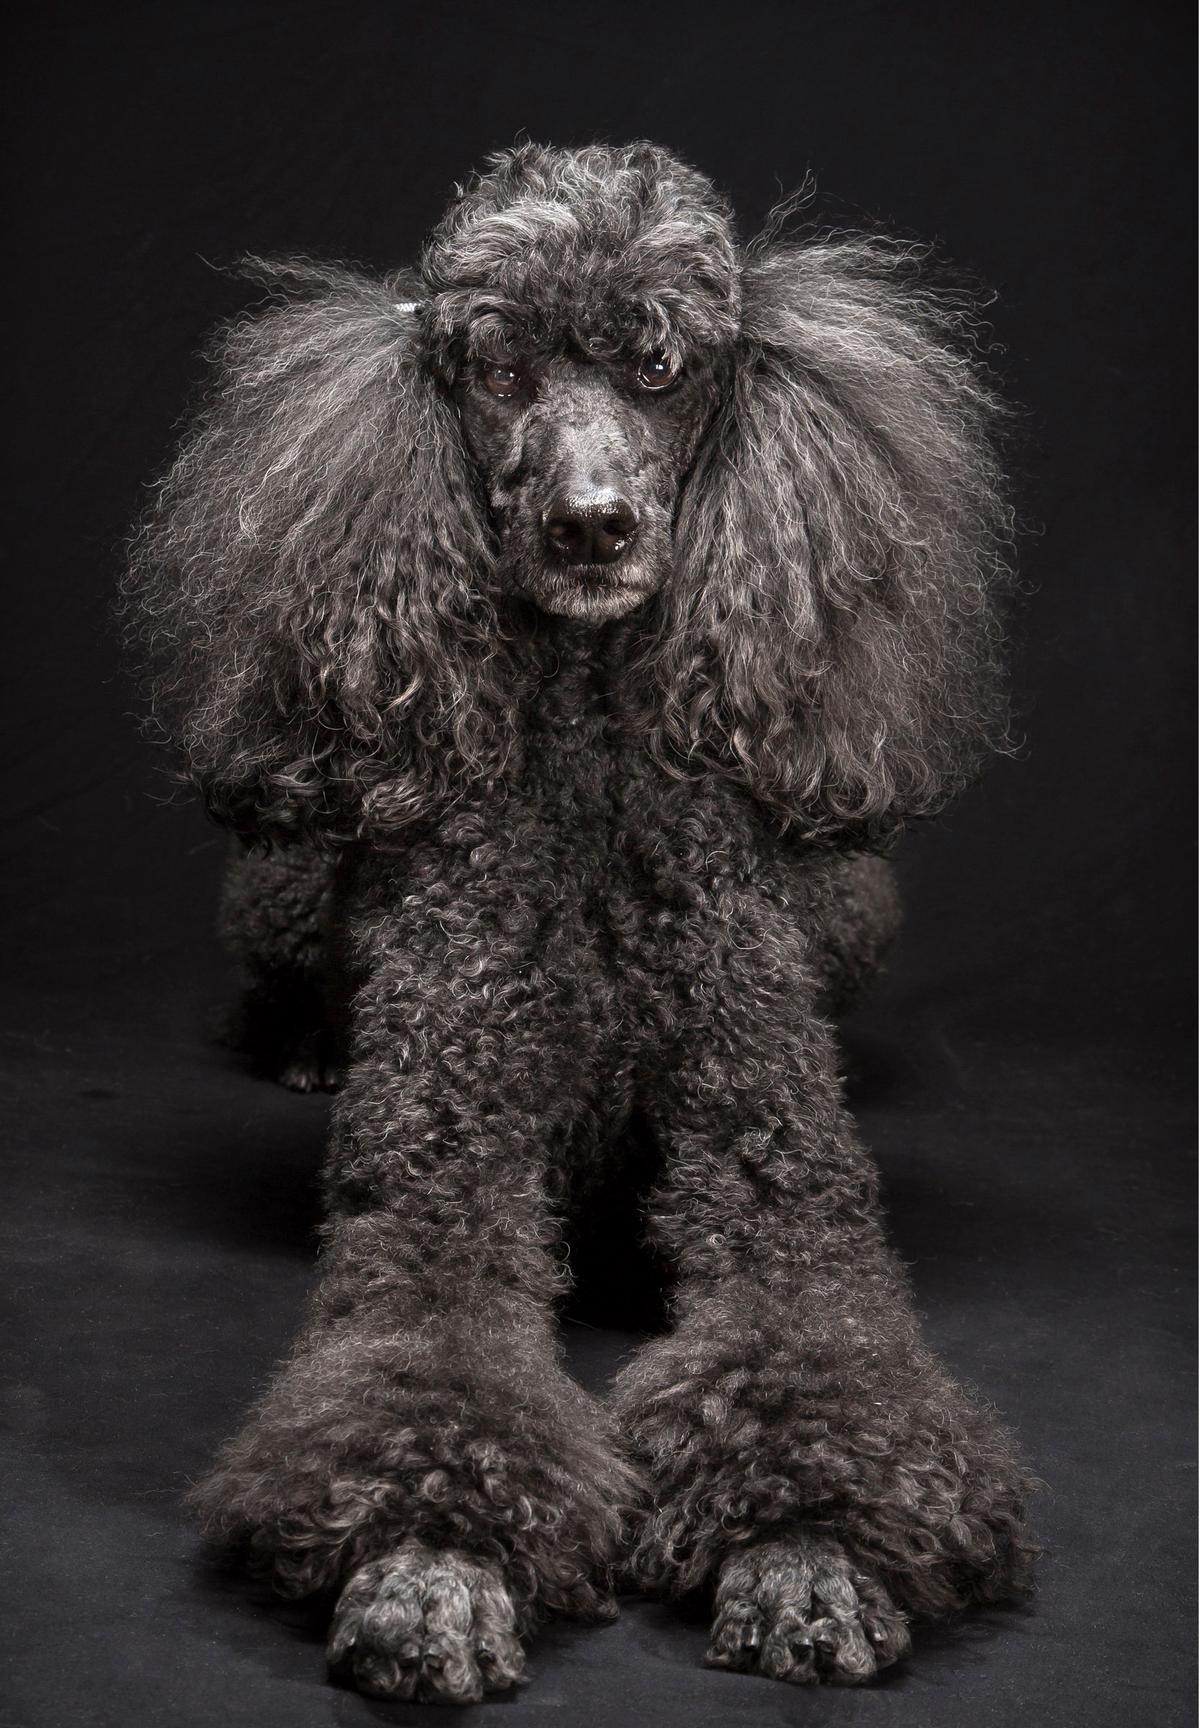 In this March 2014 photo provided by Fred Levy, a standard poodle named Mercedes Ann poses in Levy's studio in Maynard, Mass. (Fred Levy via AP)